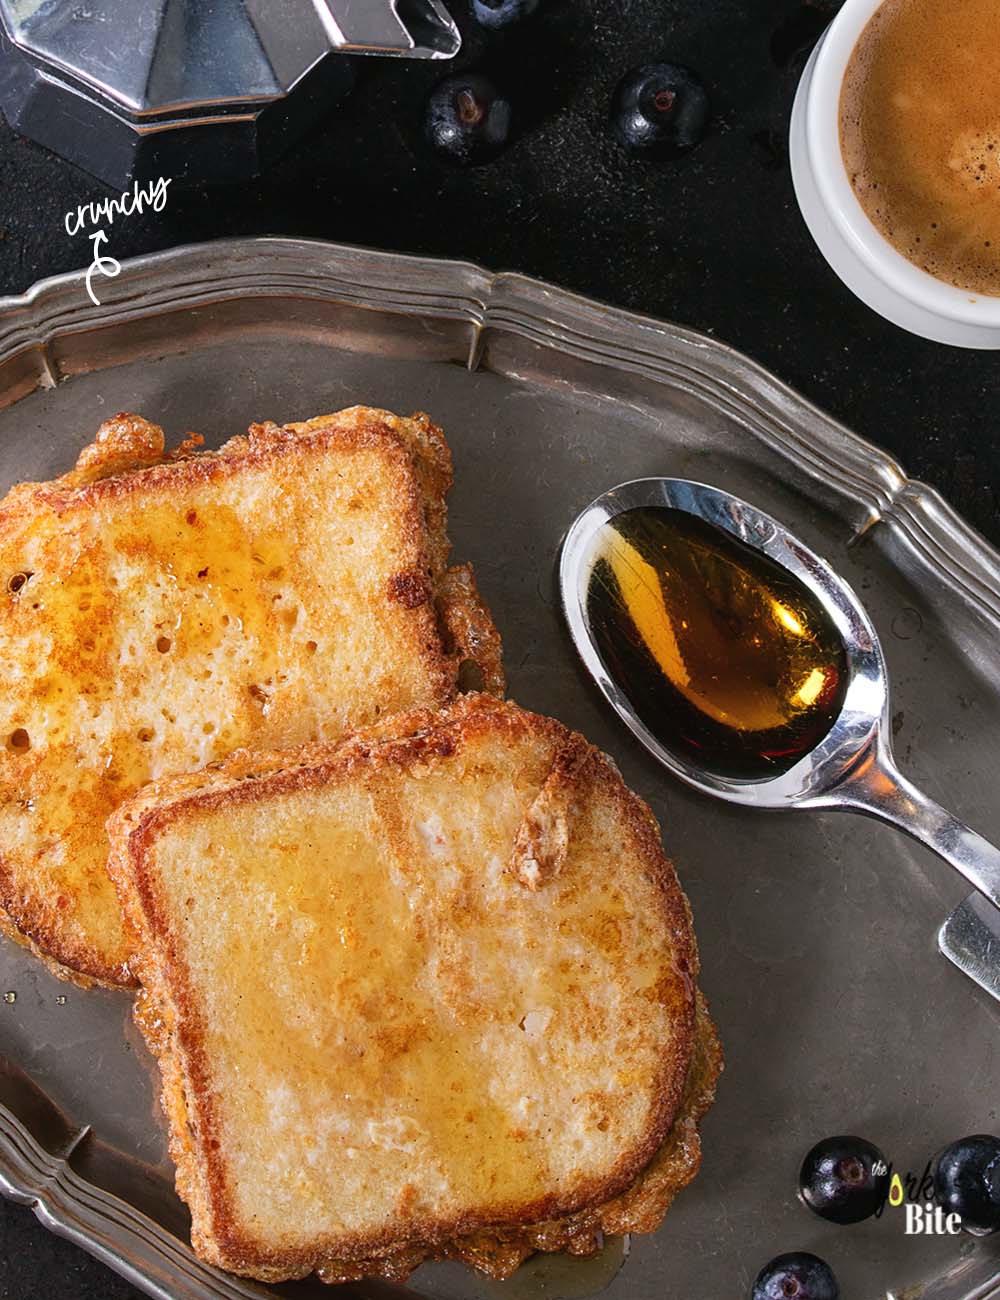 Learn some tips and tricks that should help you maximize the French toast's flavor and experience.